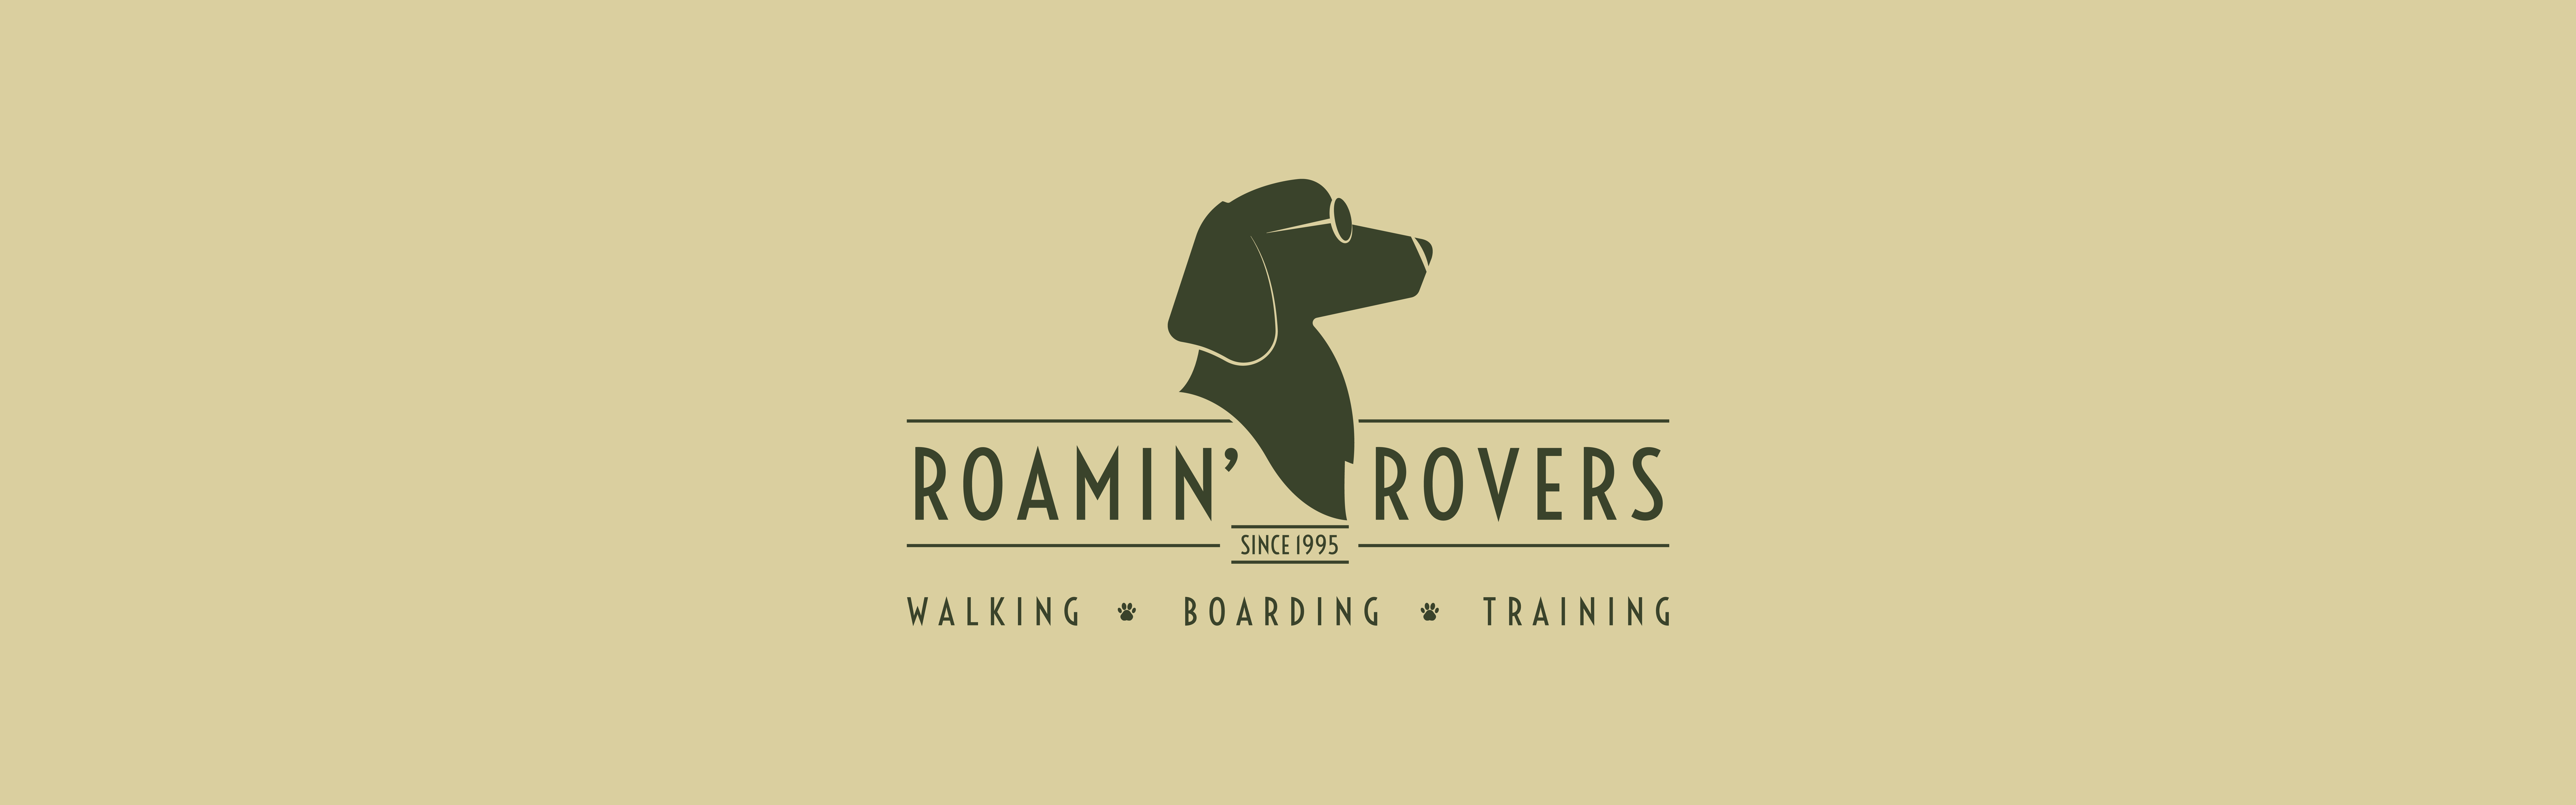 Logo of Roamin' Rovers featuring the silhouette of a dog with a leash in its mouth, set against a pale yellow background, advertising services for walking, boarding, and training of dogs.